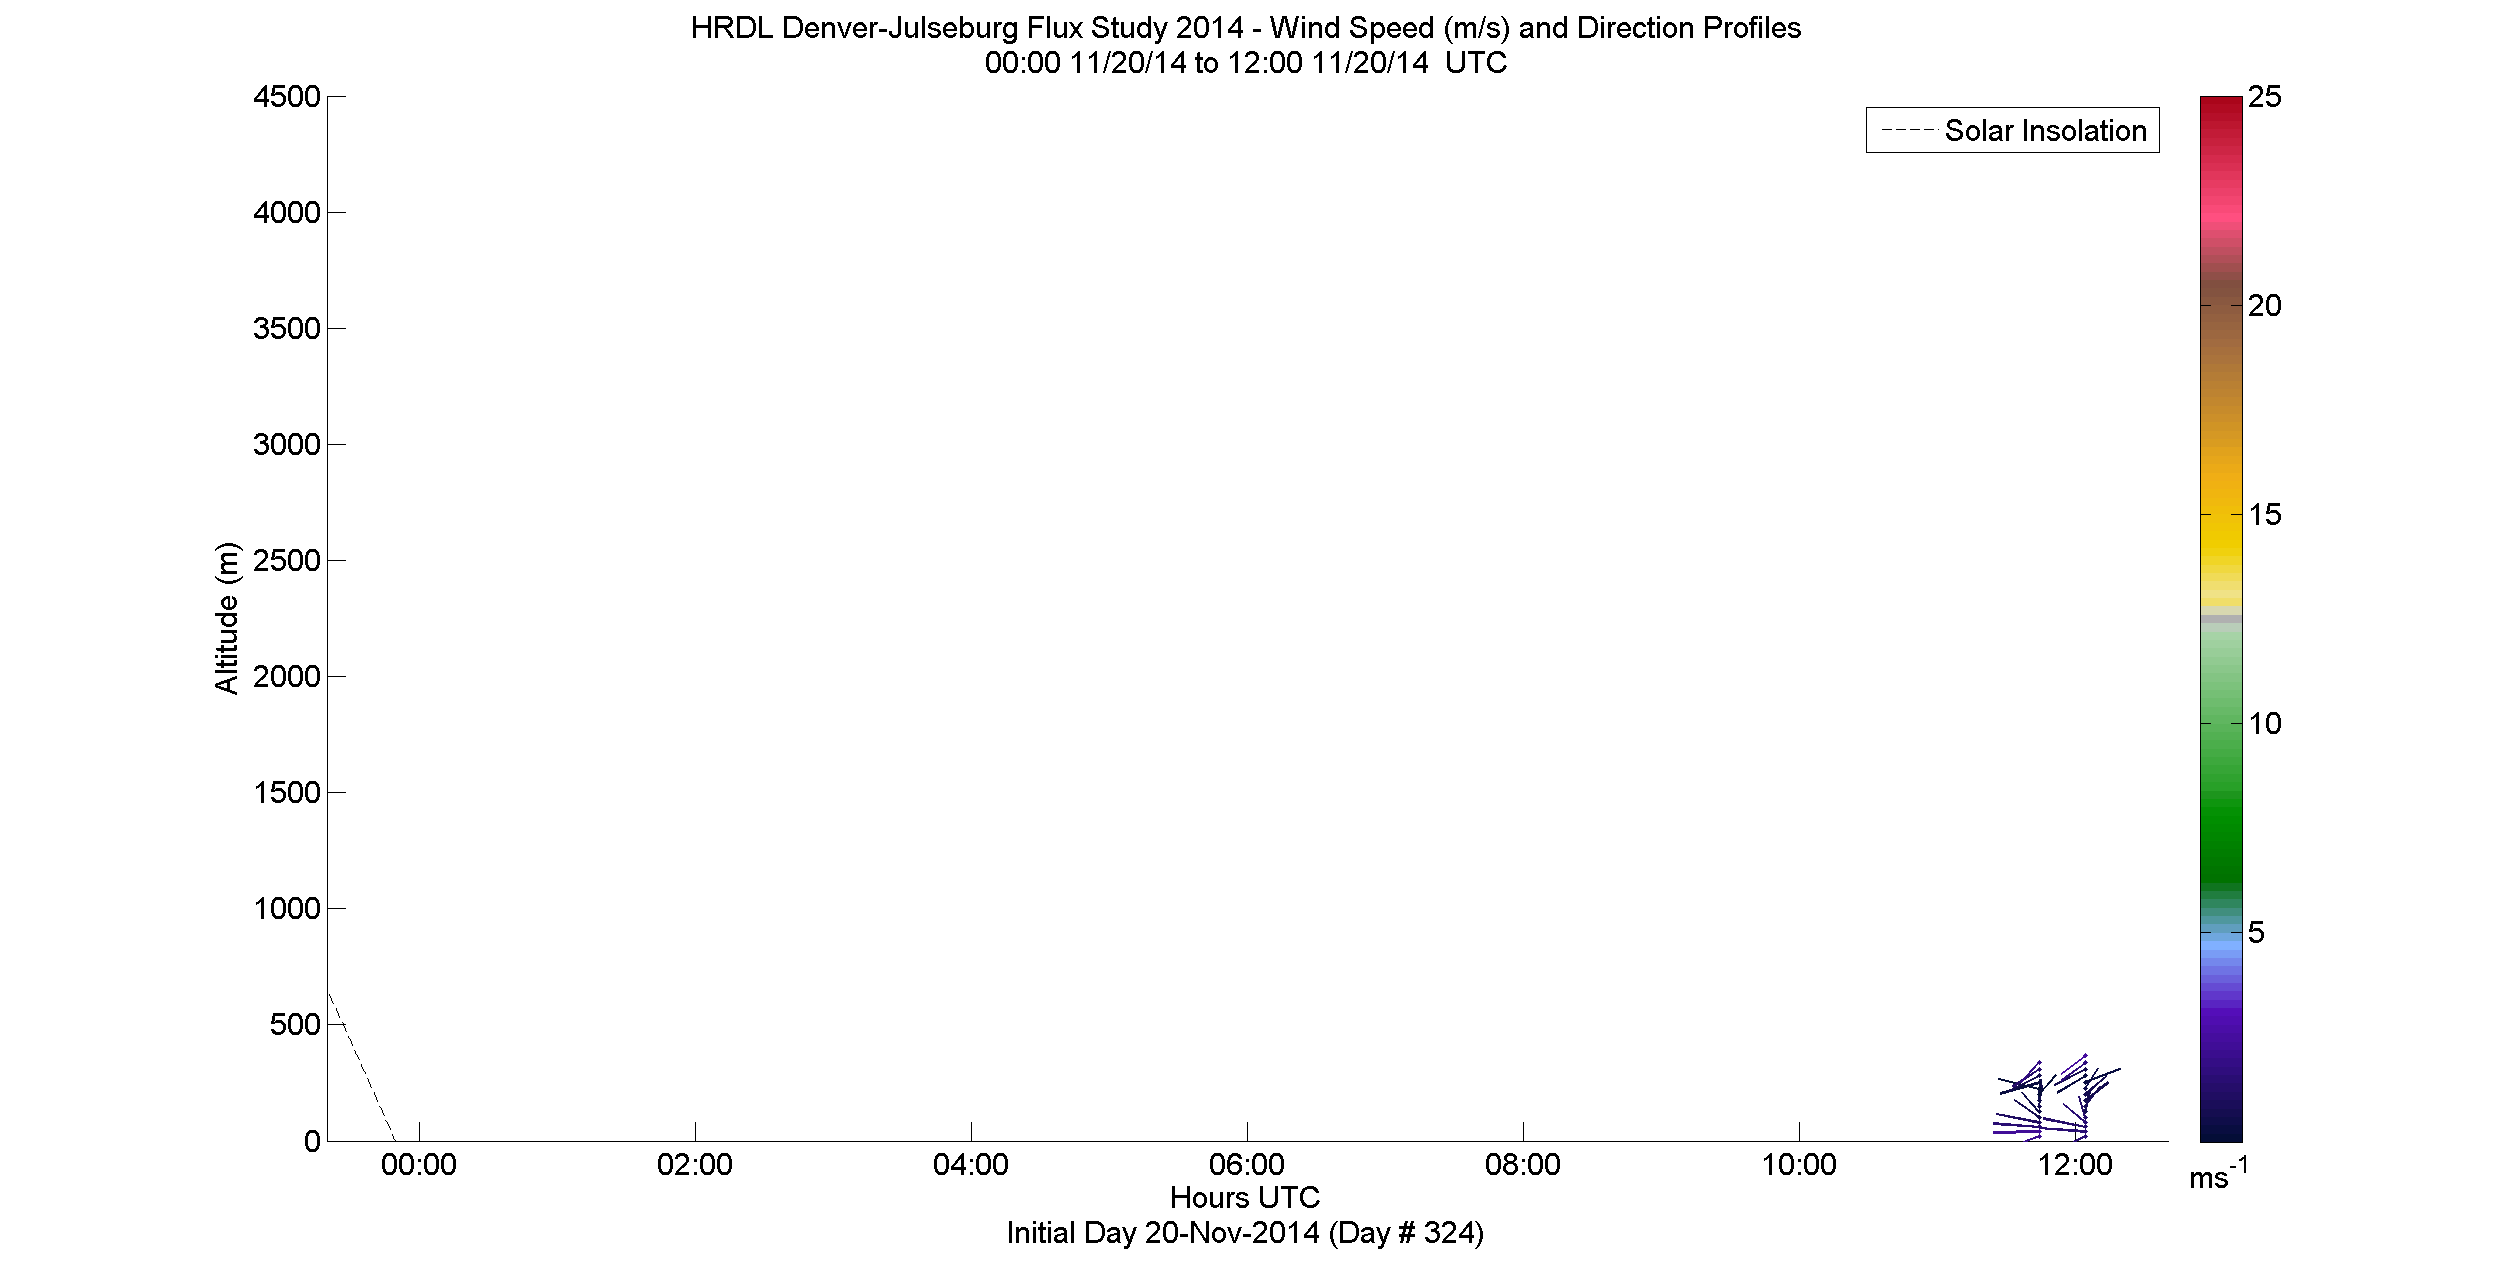 HRDL speed and direction profile - November 20 am